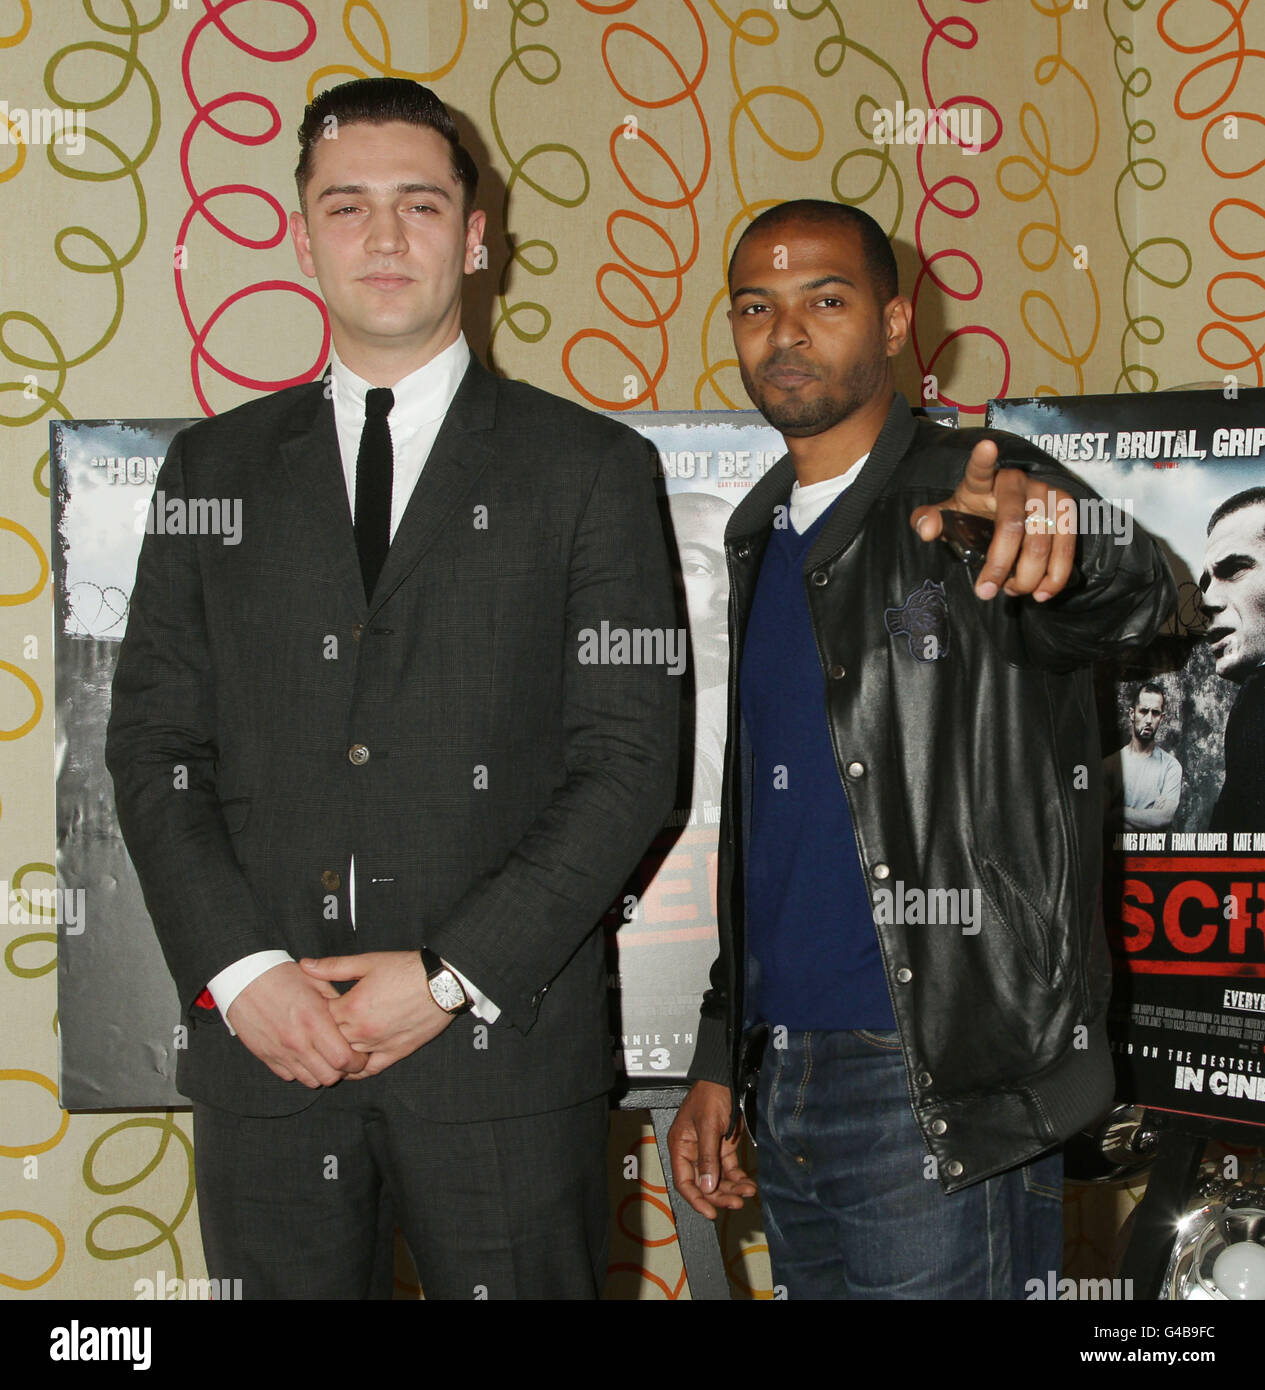 Director of the film Reg Traviss (left) and Noel Clarke arriving for the premiere of Screwed, at The Soho Hotel in central London. Stock Photo